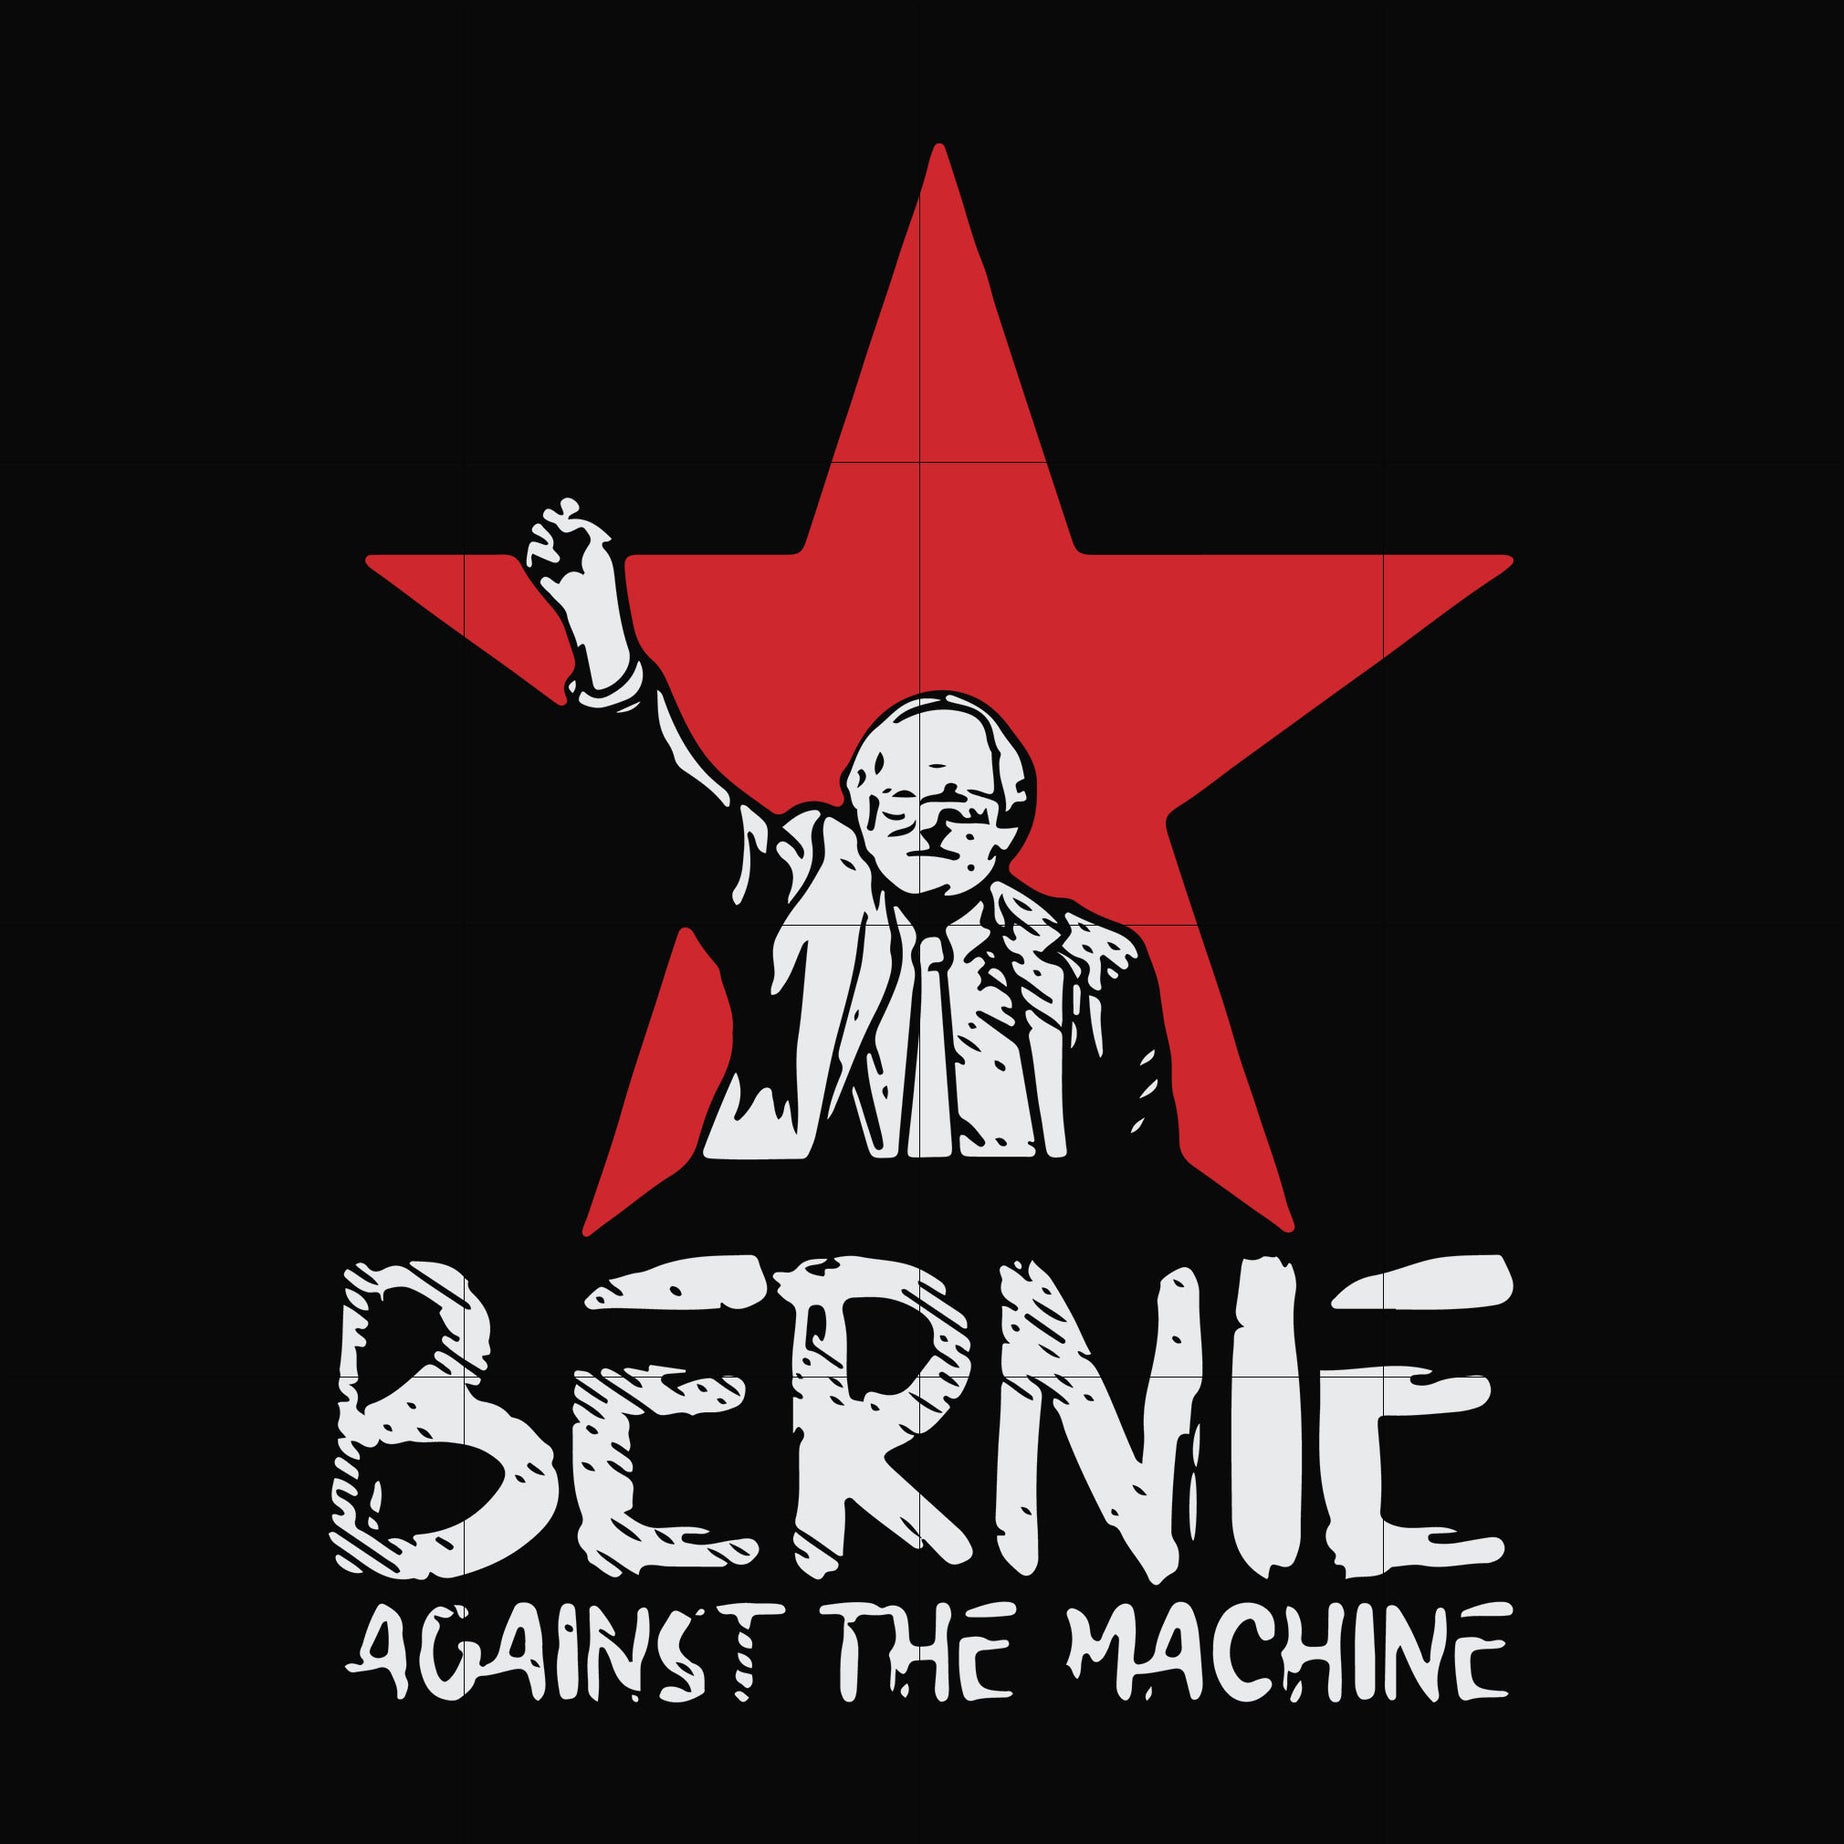 Bernie against the machine svg, png, dxf, eps file FN000975